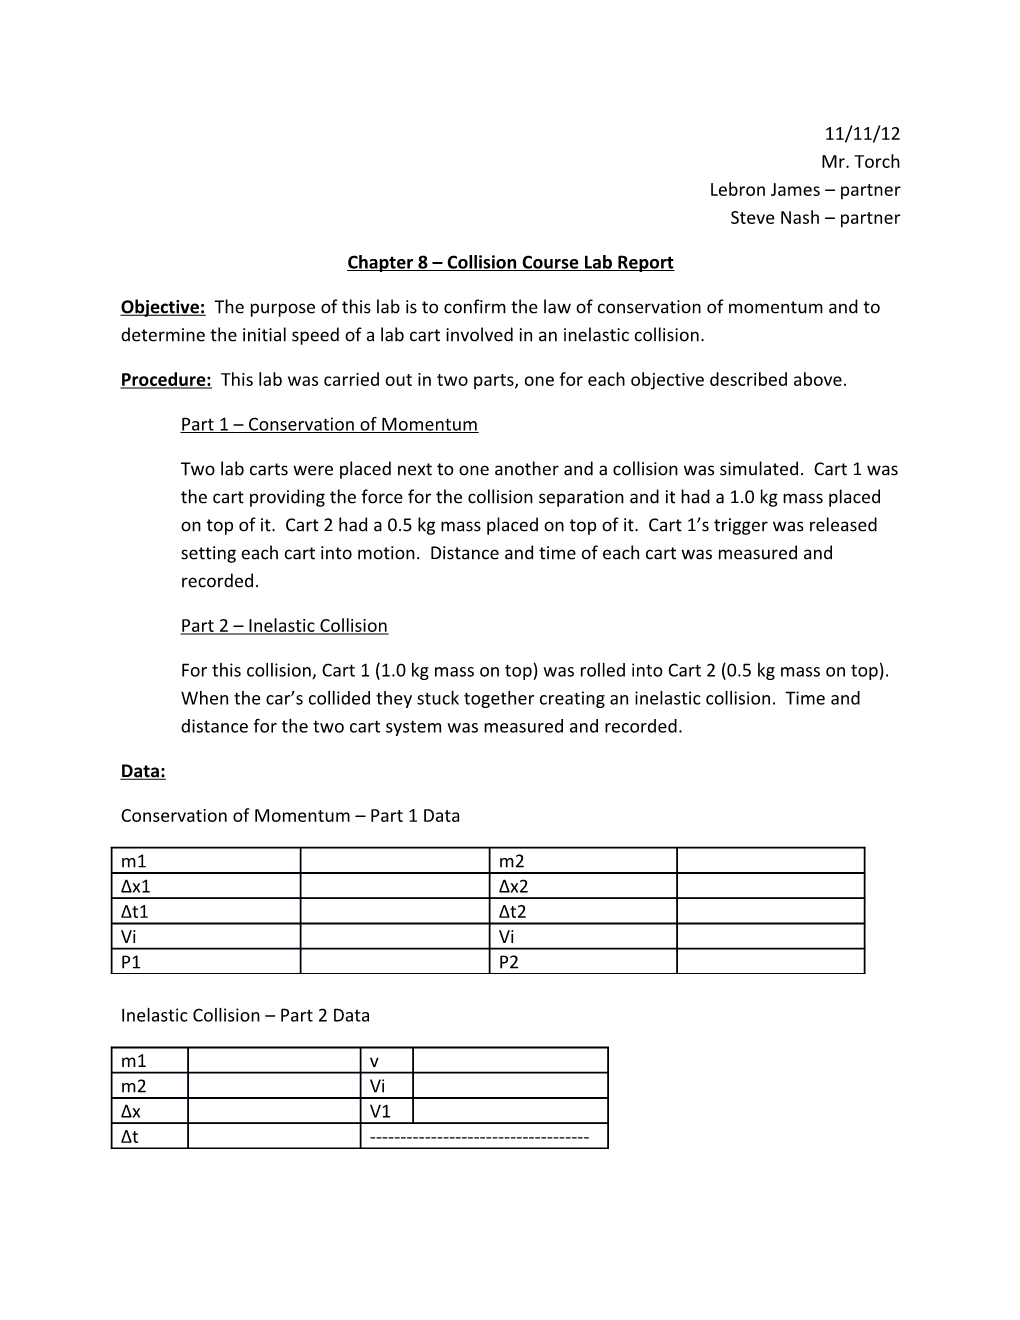 Chapter 8 Collision Course Lab Report